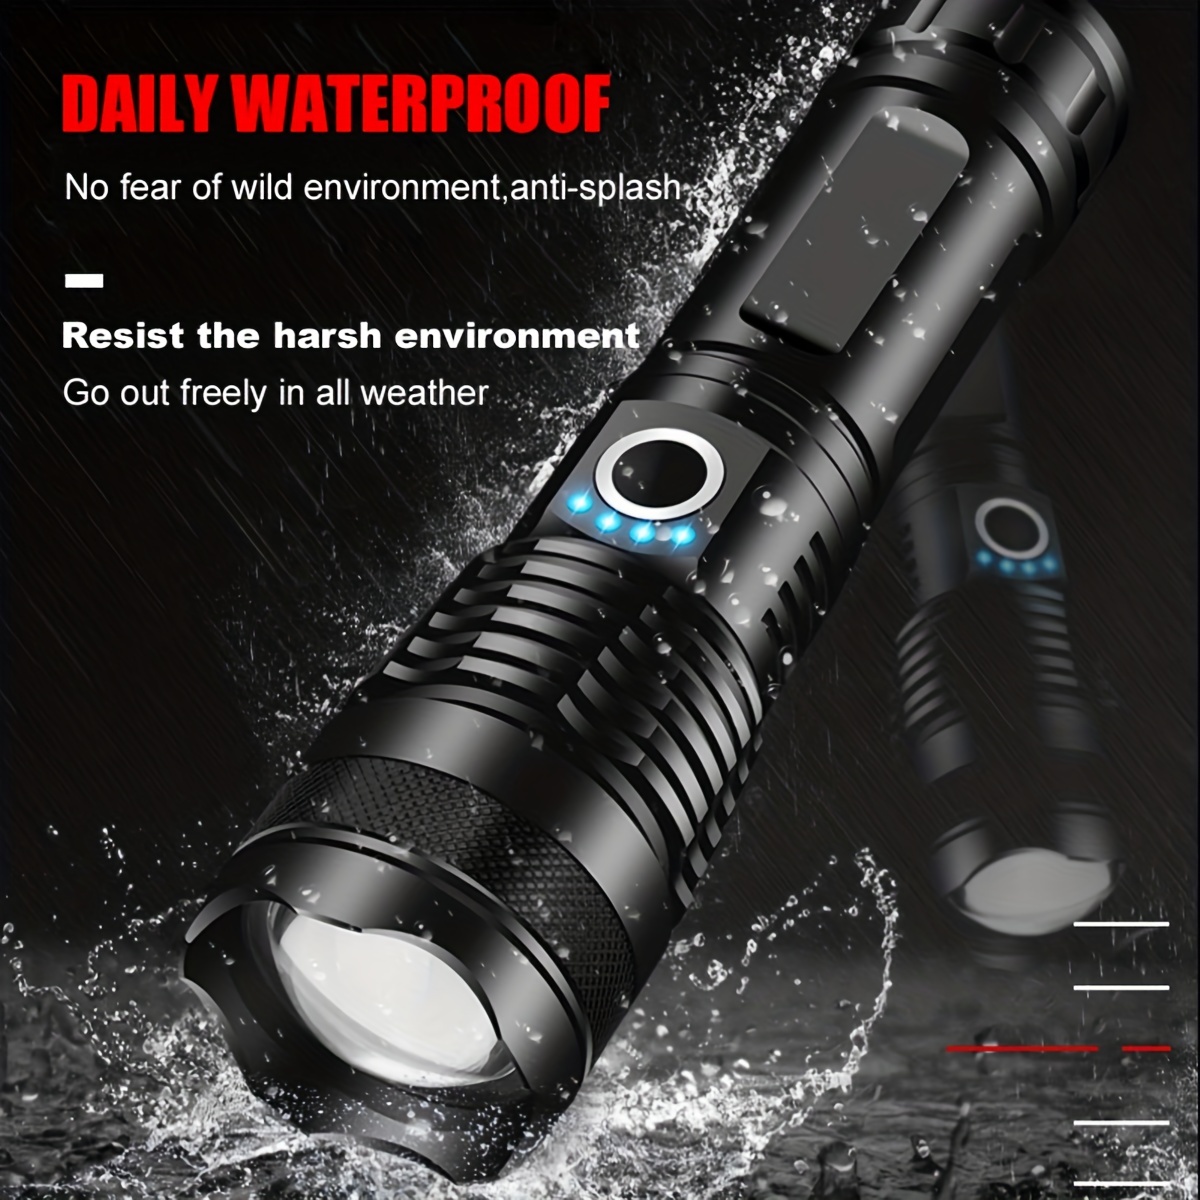 1pc USB Rechargeable LED Flashlights High Lumens, 200000 Lumens Bright  Zoomable Waterproof Flashlight, With 5 Modes & Waterproof, Powerful  Handheld Fl